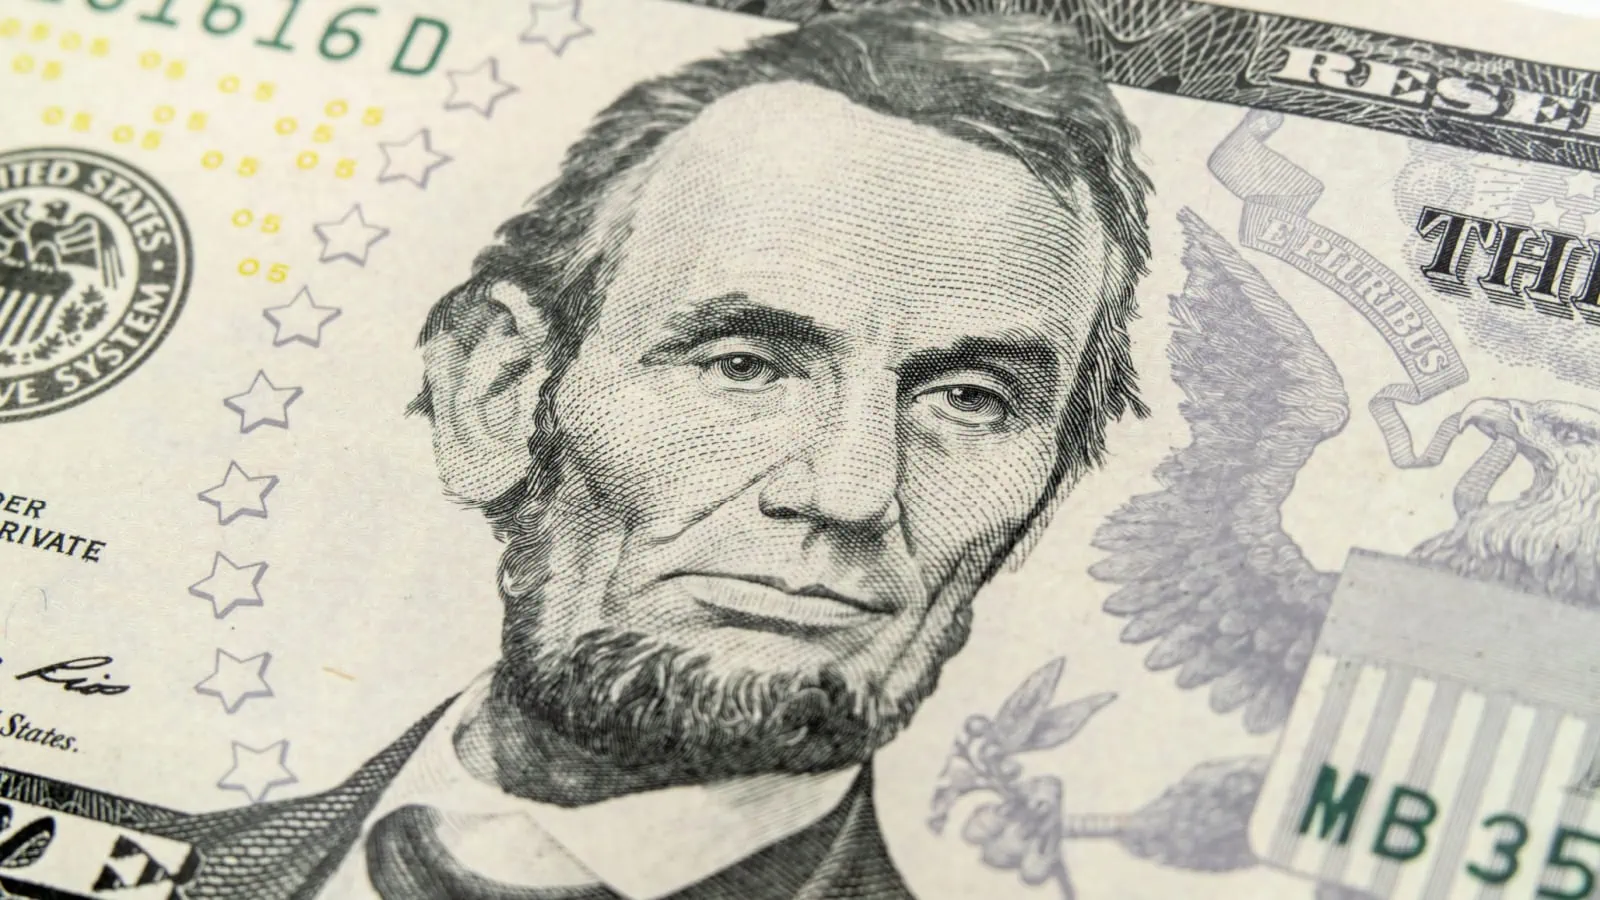 Abraham Lincoln on a dollar note